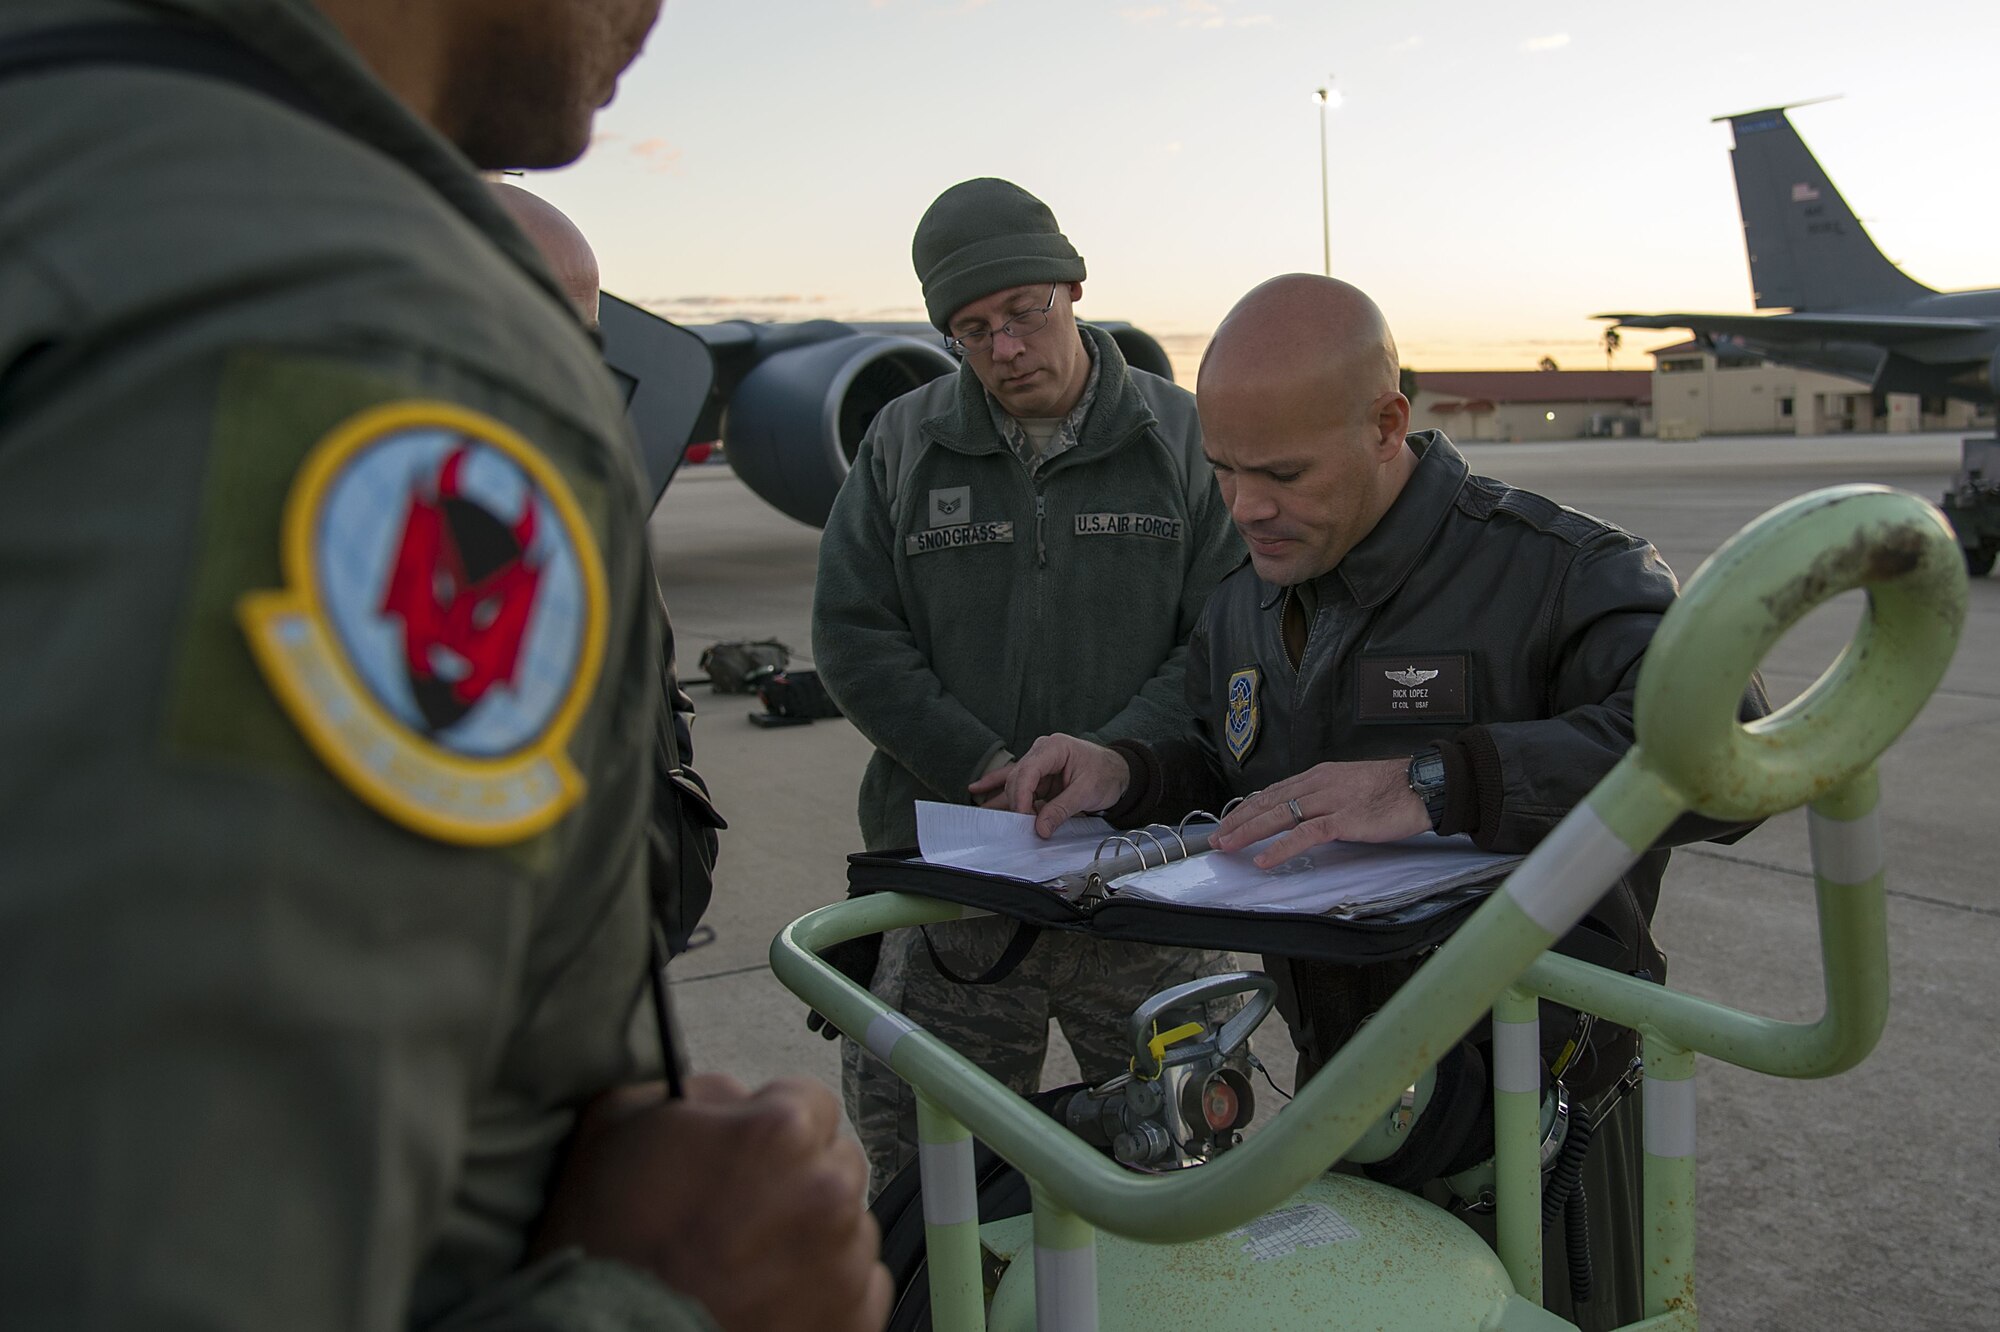 U.S. Air Force Lt. Col. Ricardo Lopez, the 50th Air Refueling Squadron (ARS) commander, reviews the aircraft documentation before taking off for the first 50th ARS’s training mission at MacDill Air Force Base, Fla., Jan. 16, 2018. The 50th ARS brought with it eight new aircraft to MacDill, expanding Air Mobility Command’s global reach. (U.S. Air Force photo by Airman 1st Class Caleb Nunez)